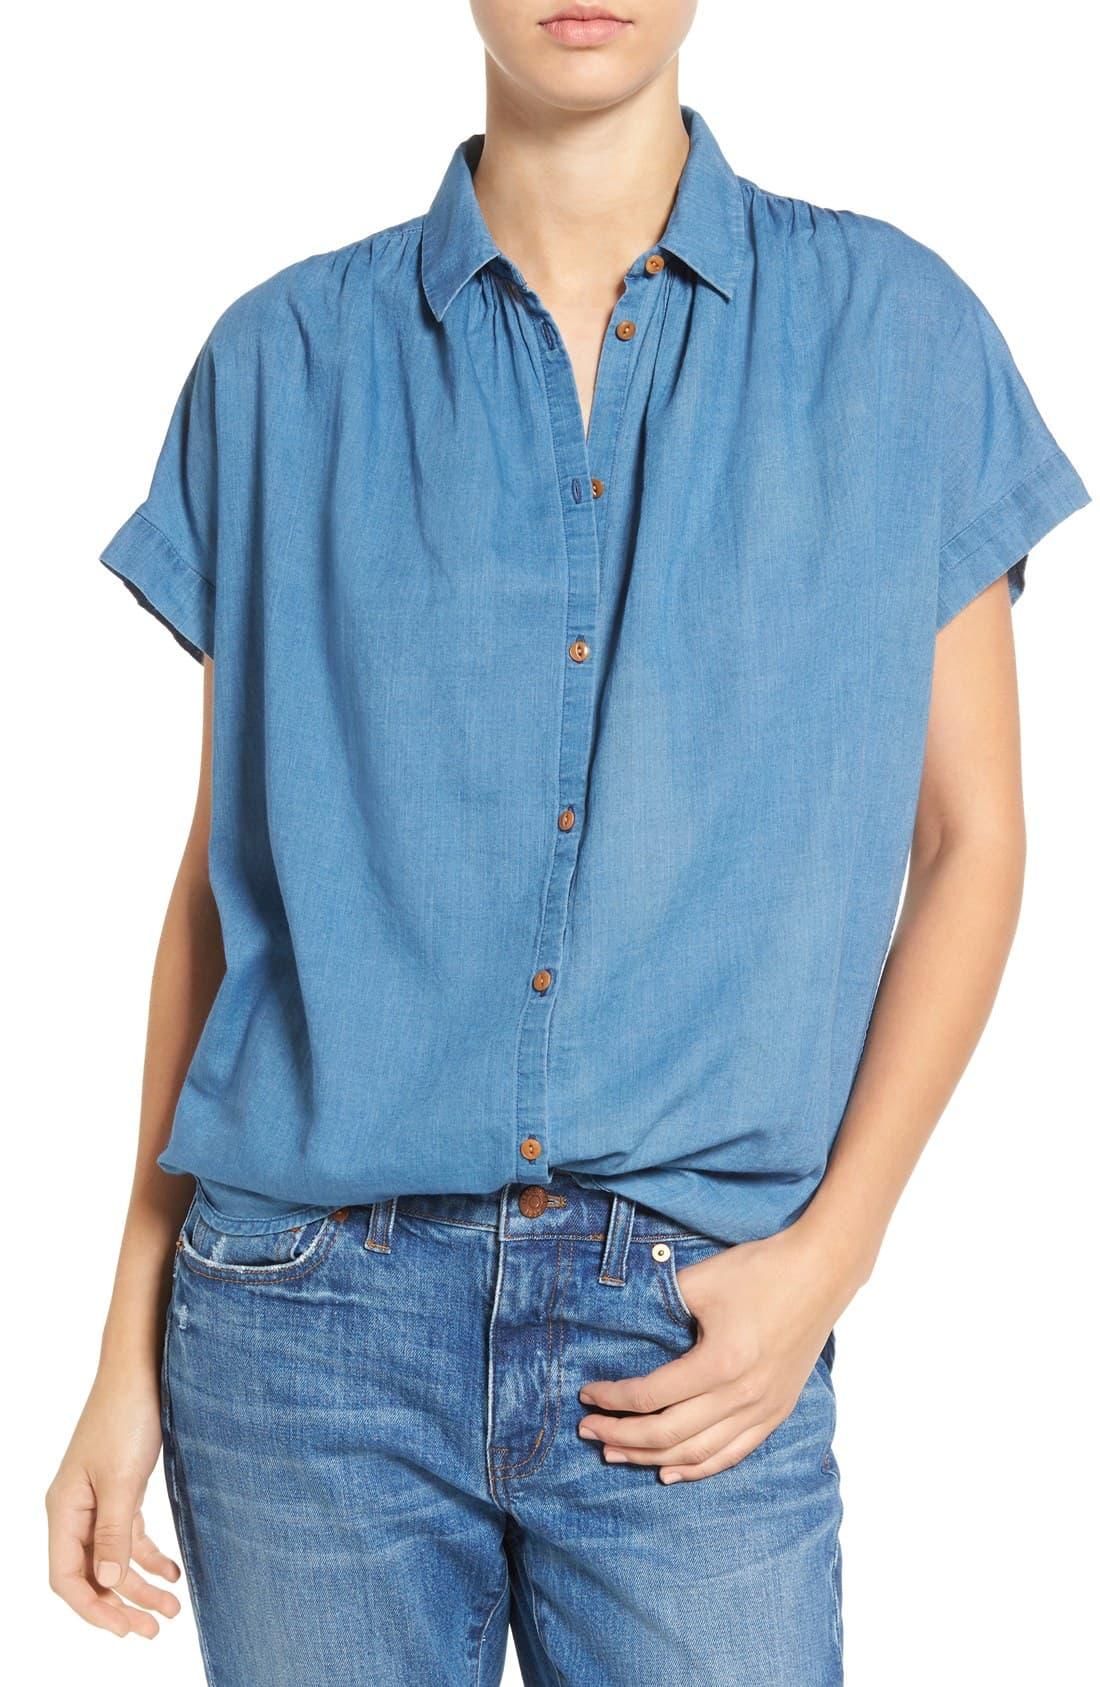 Madewell Central Chambray Shirt in Bright Indigo (Blue) - Lyst